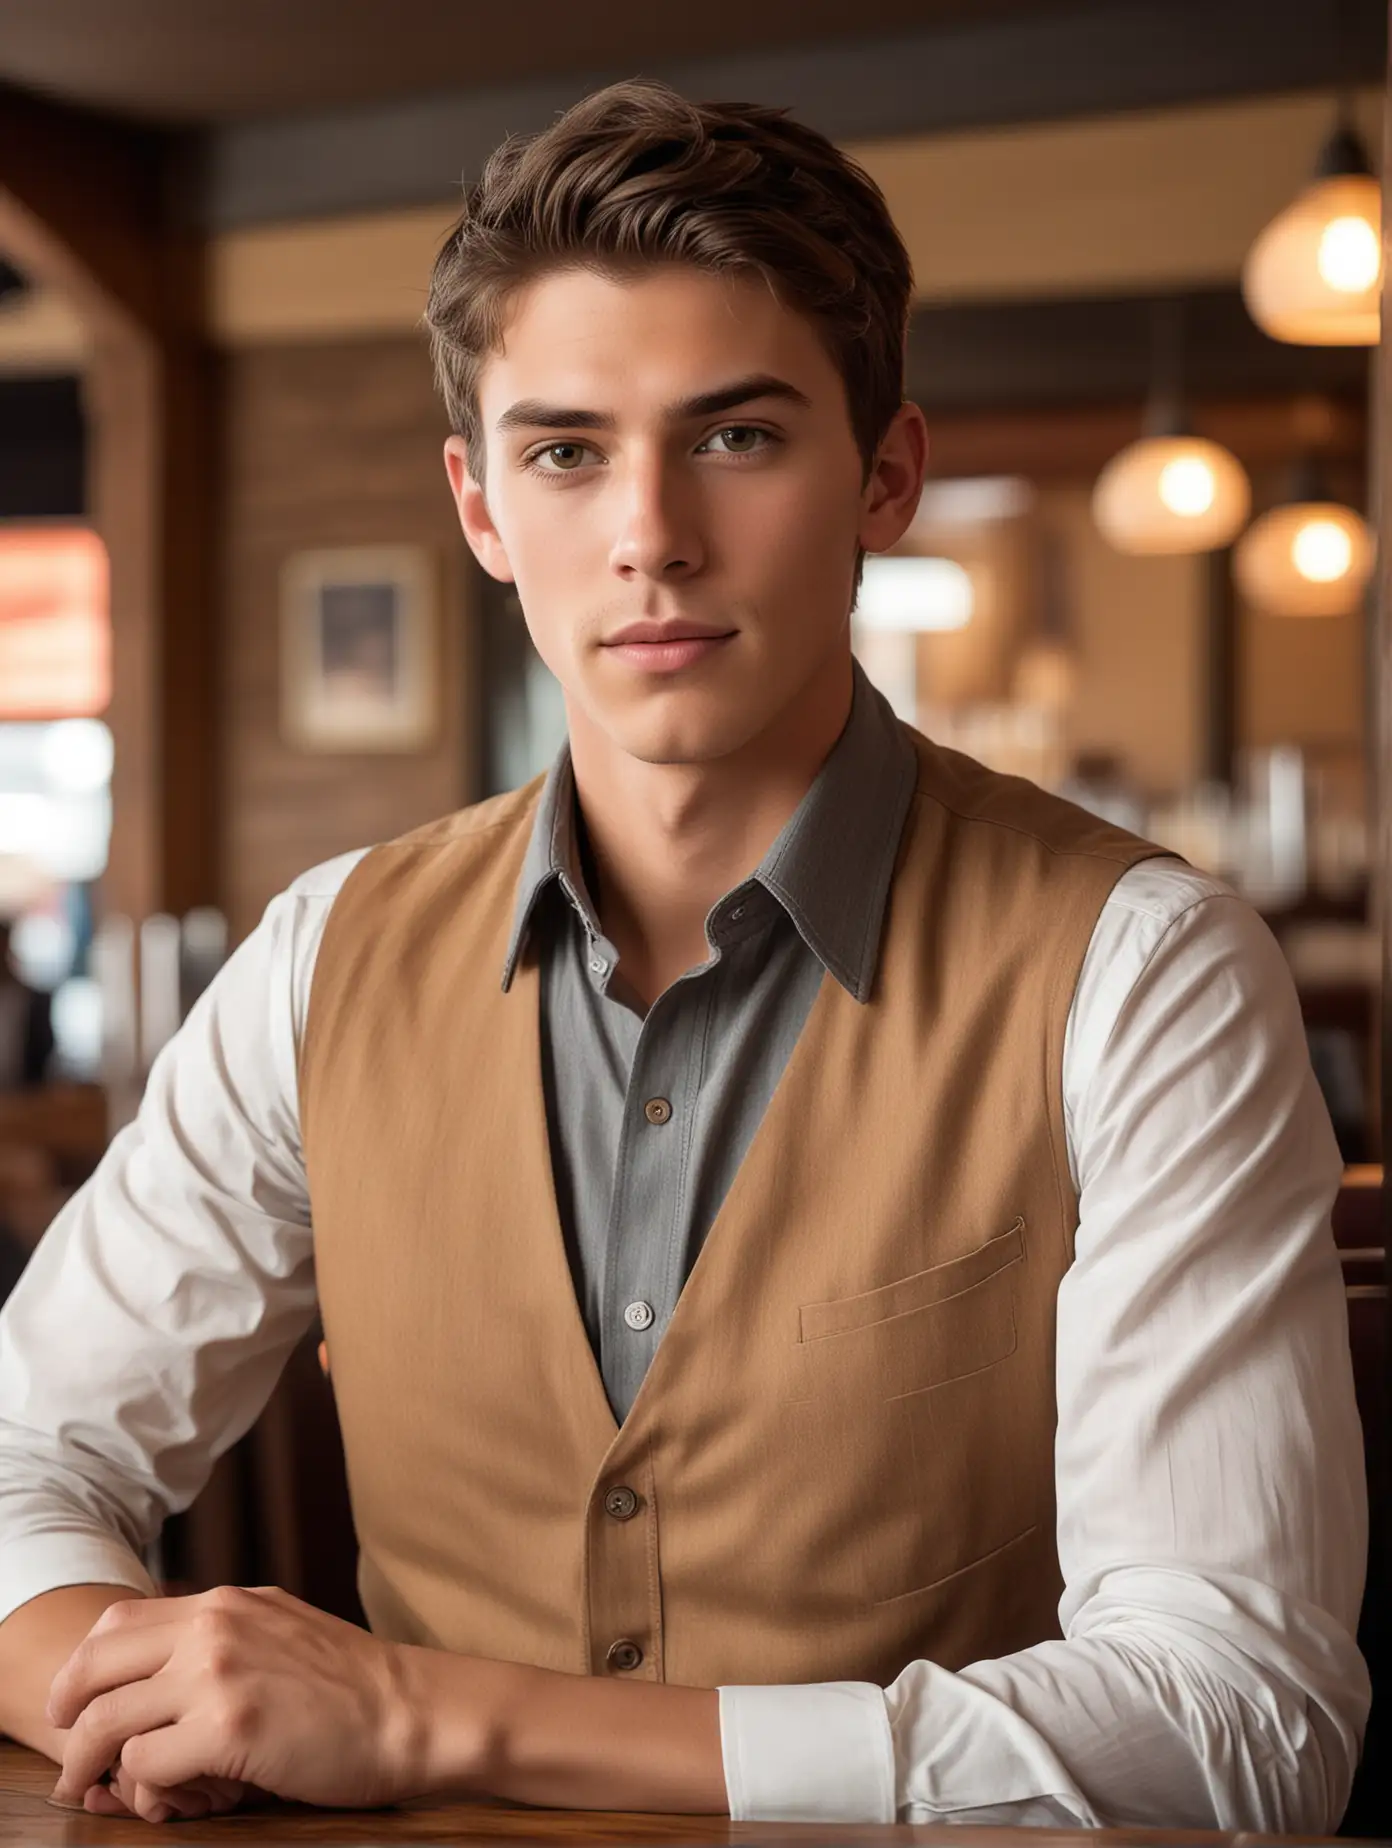 Handsome and sexy American boy, in a western restaurant, facing the camera, handsome, exquisite facial features, professional photography technology, full body photo